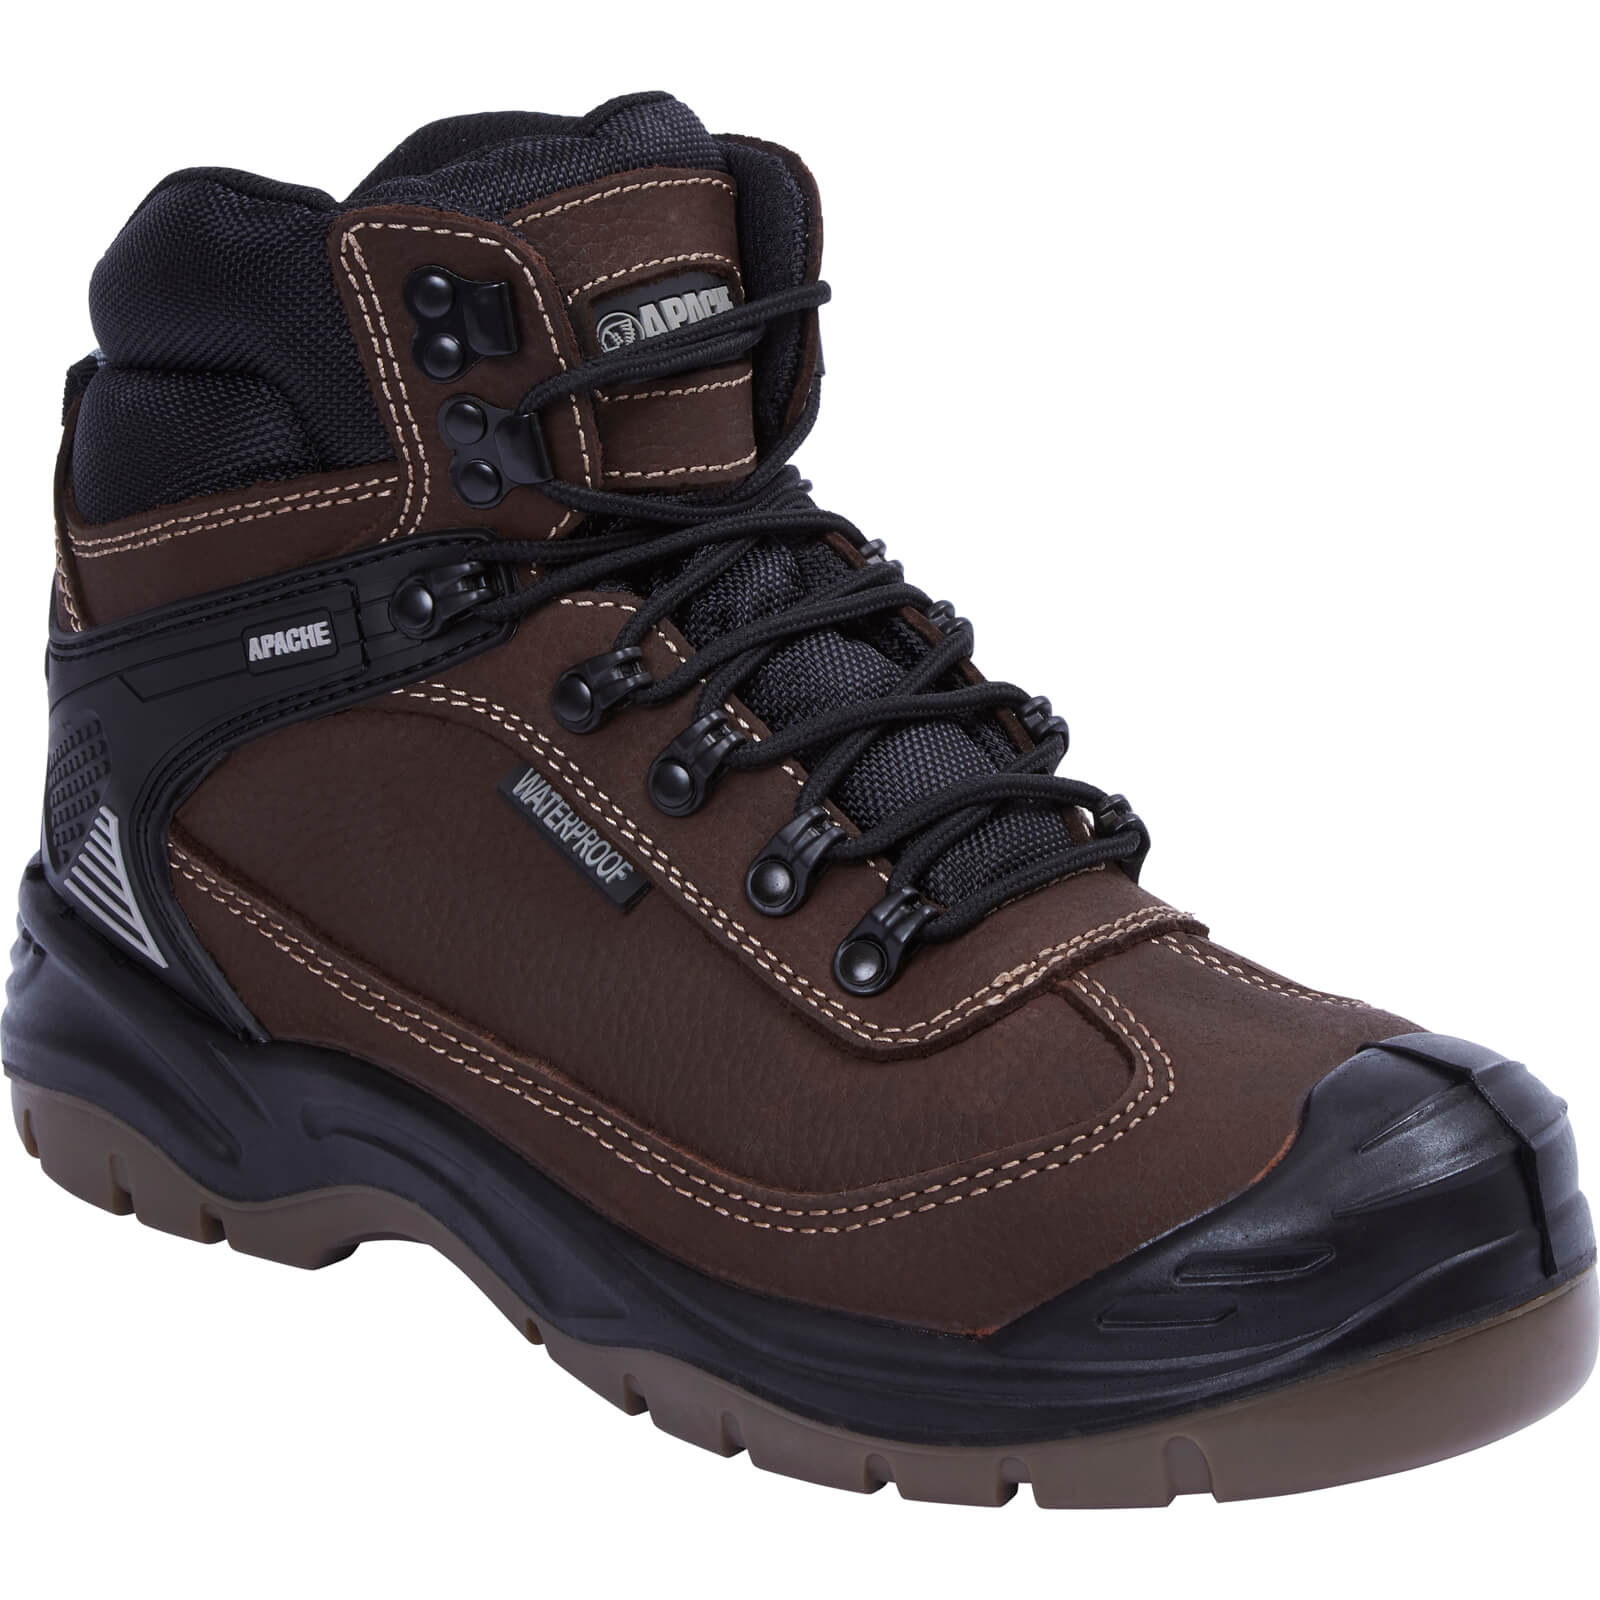 Apache RANGER Waterproof Safety Hiker Boots Brown Size 5